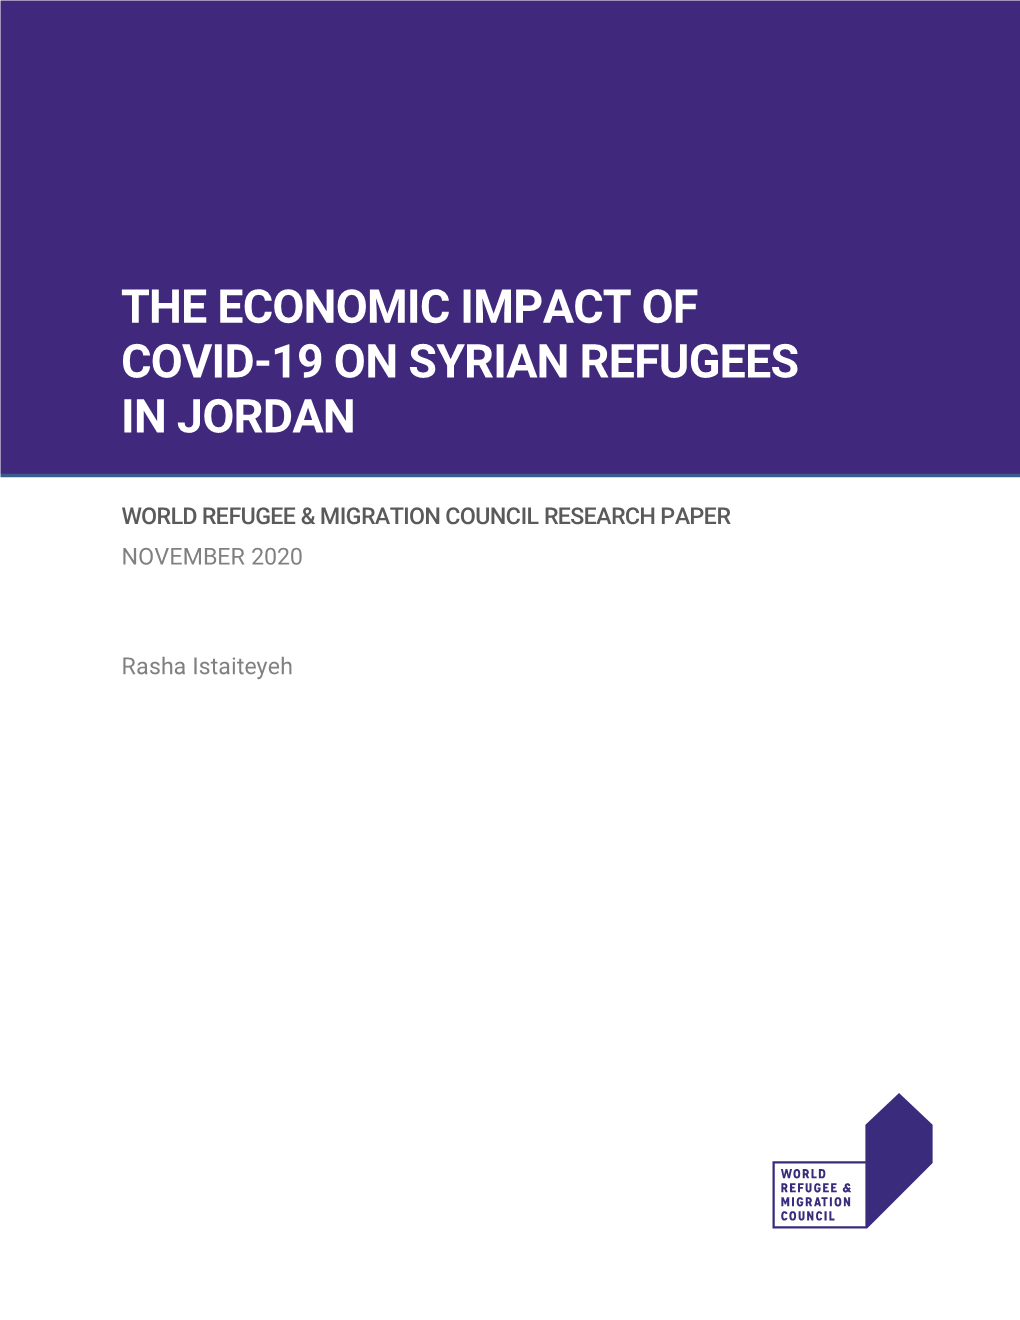 The Economic Impact of COVID-19 on Syrian Refugees in Jordan